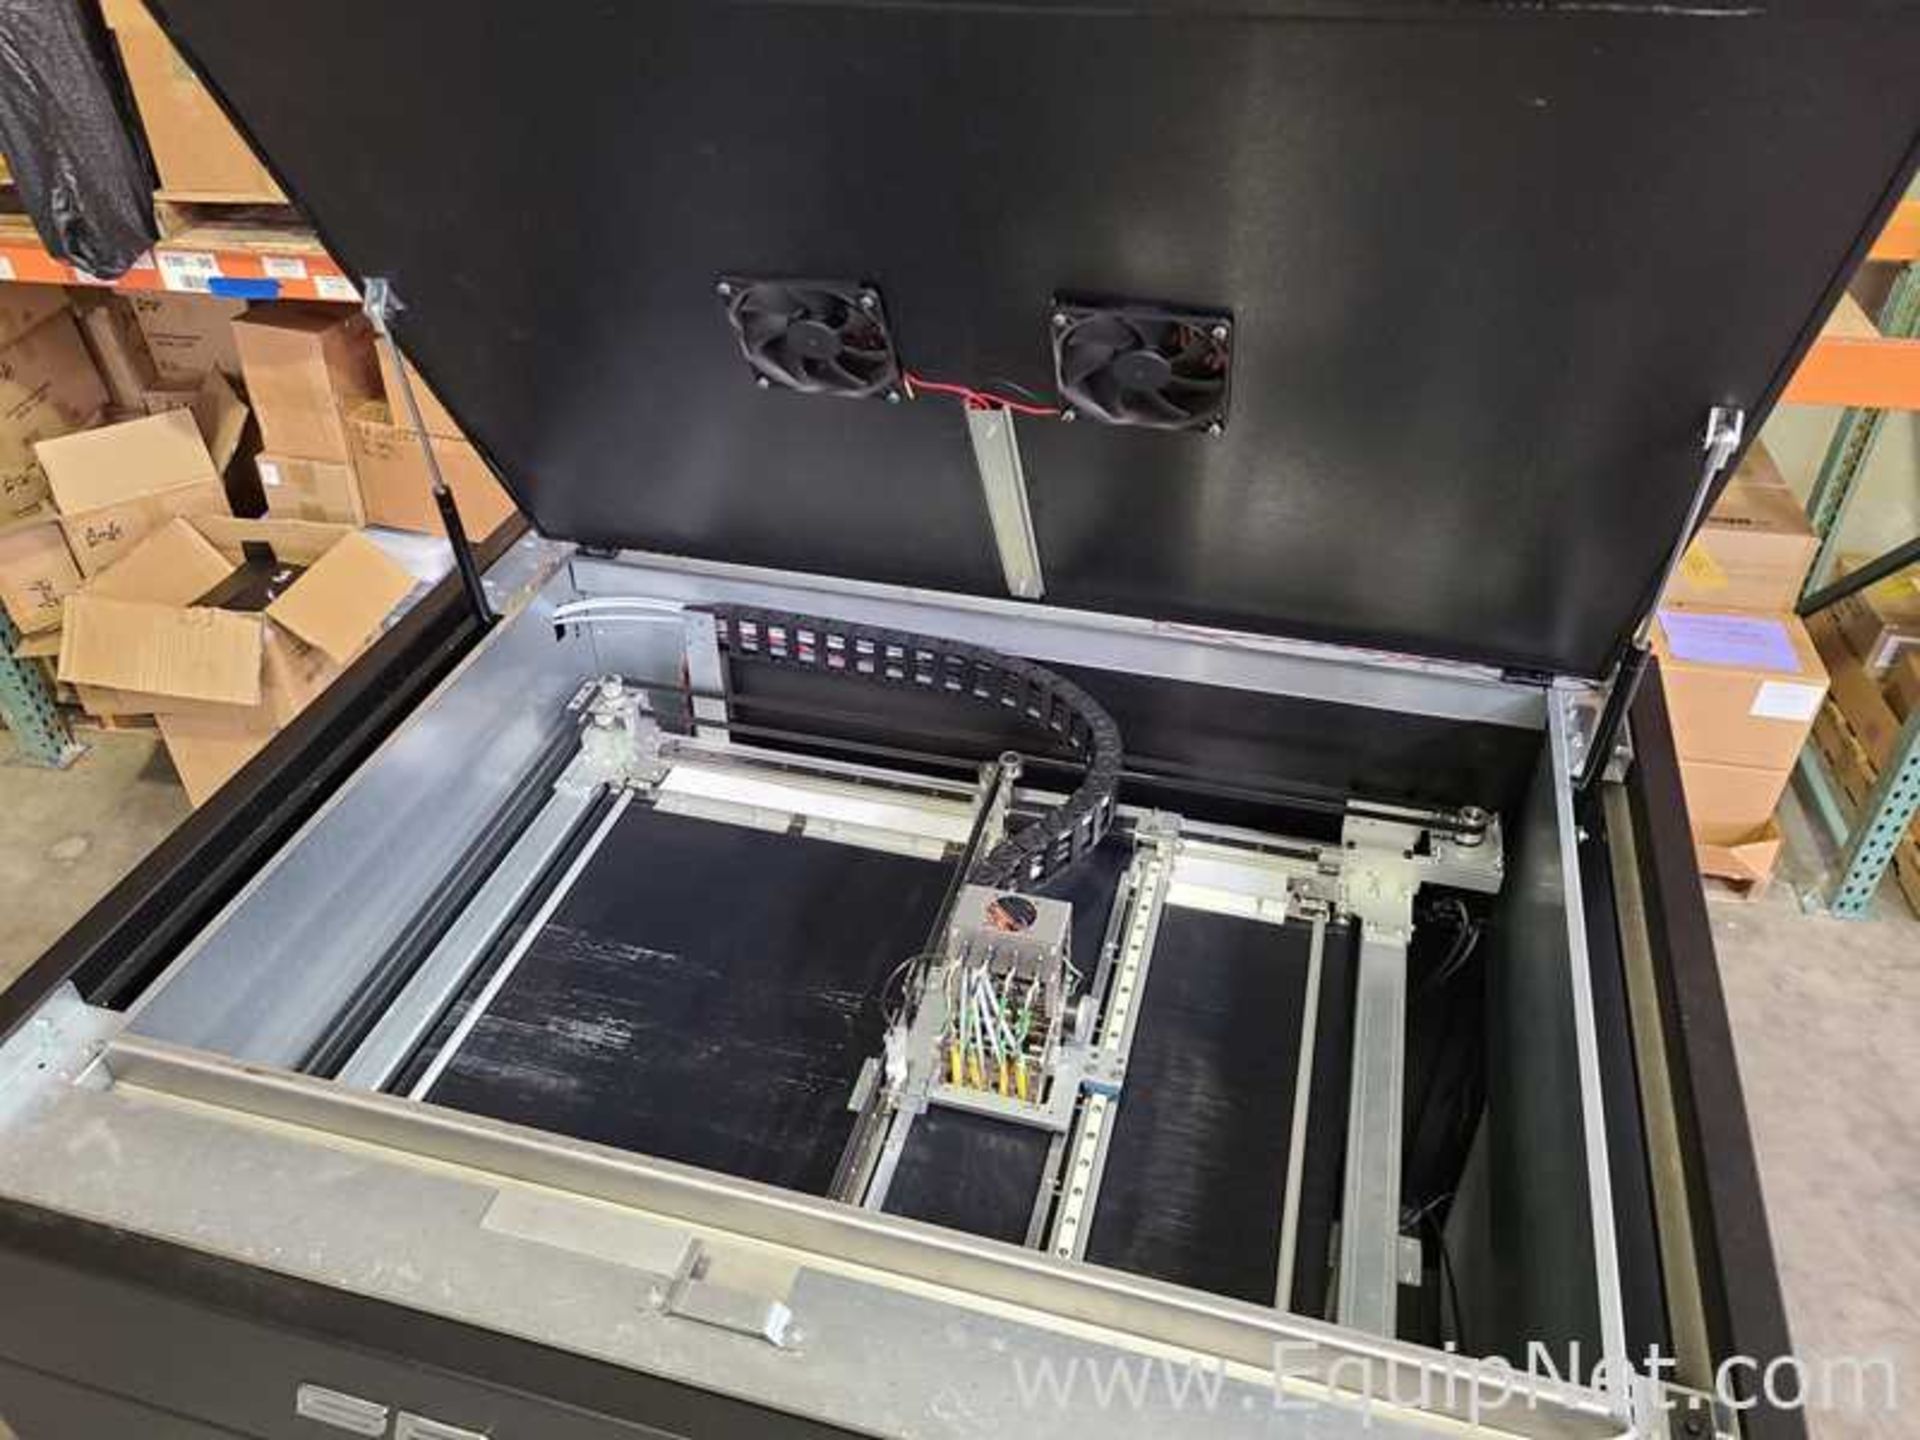 3ntr Spectral 30 3D Printer - NEEDS WORK TO BE FULLY FUNCTIONAL - Image 8 of 10